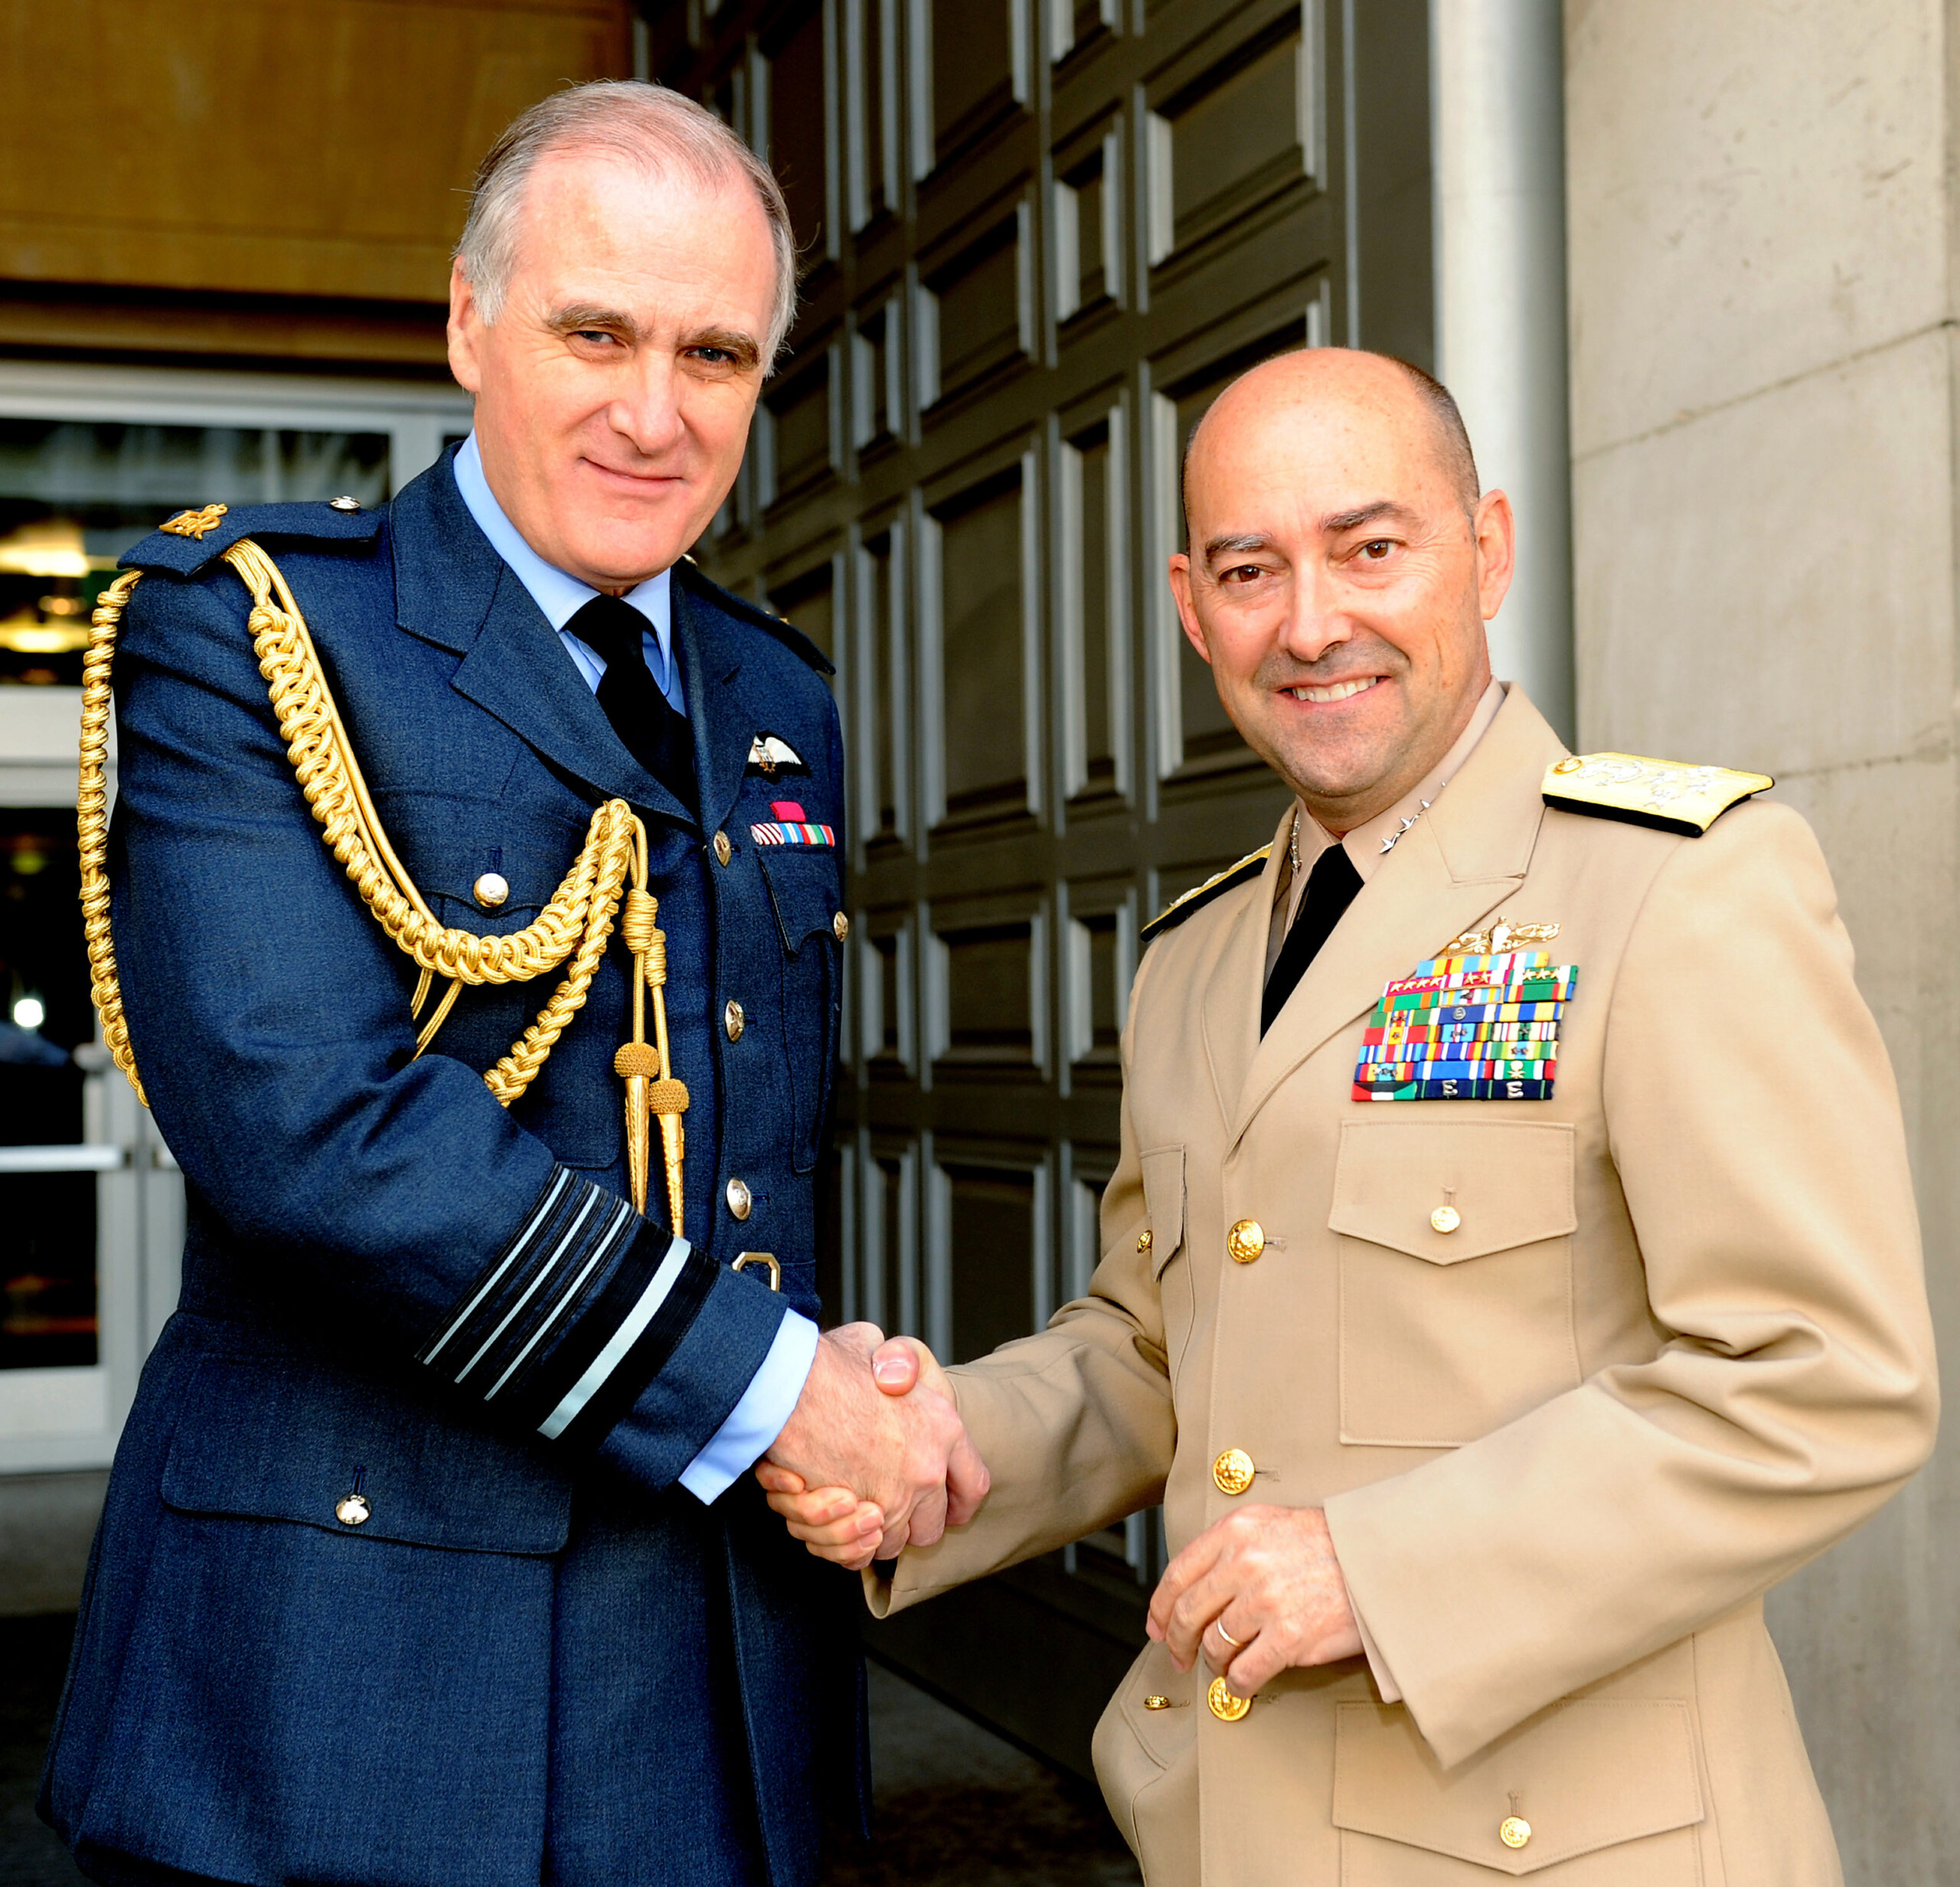 Supreme Allied Commander Europe, Adm. James G. Stavridis, visits the Ministry of Defence (London). Stavridis (right) is pictured with Air Chief Marshal Sir Jock Stirrup, chief of the Defence Staff. (Photo by Mez Merrill/Released)